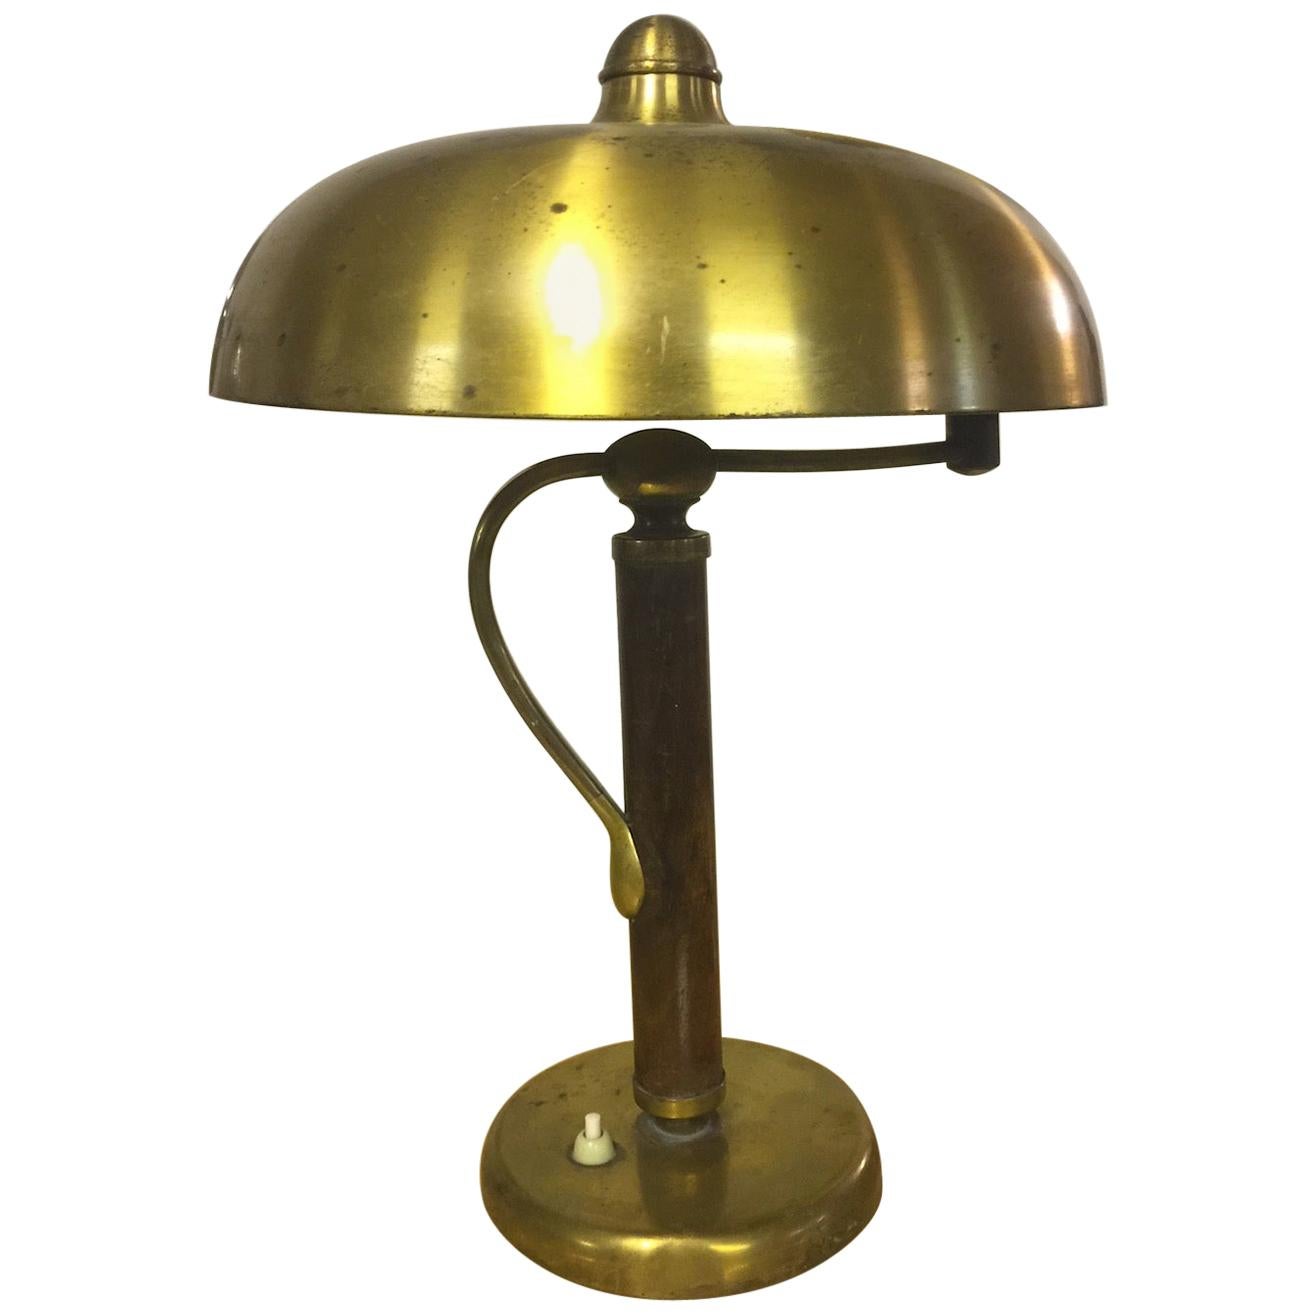 Very Rare and Exclusive Alfed Müller Table Lamp For Sale